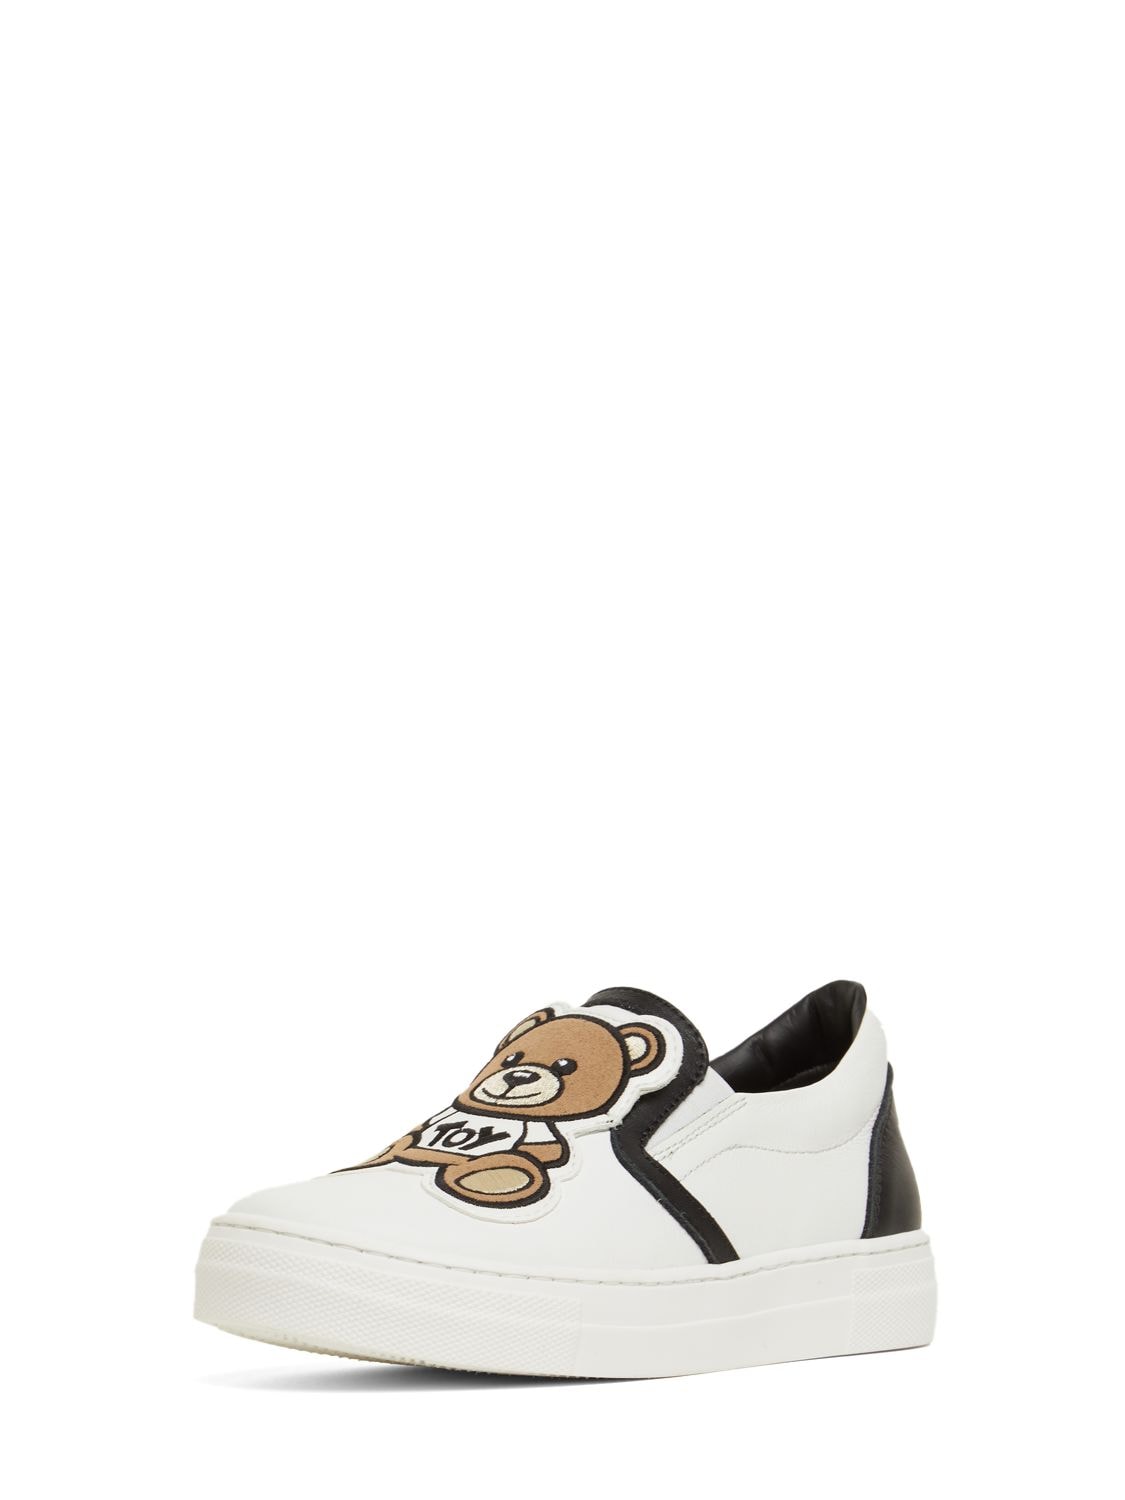 MOSCHINO LEATHER SNEAKERS W/ TEDDY PATCH